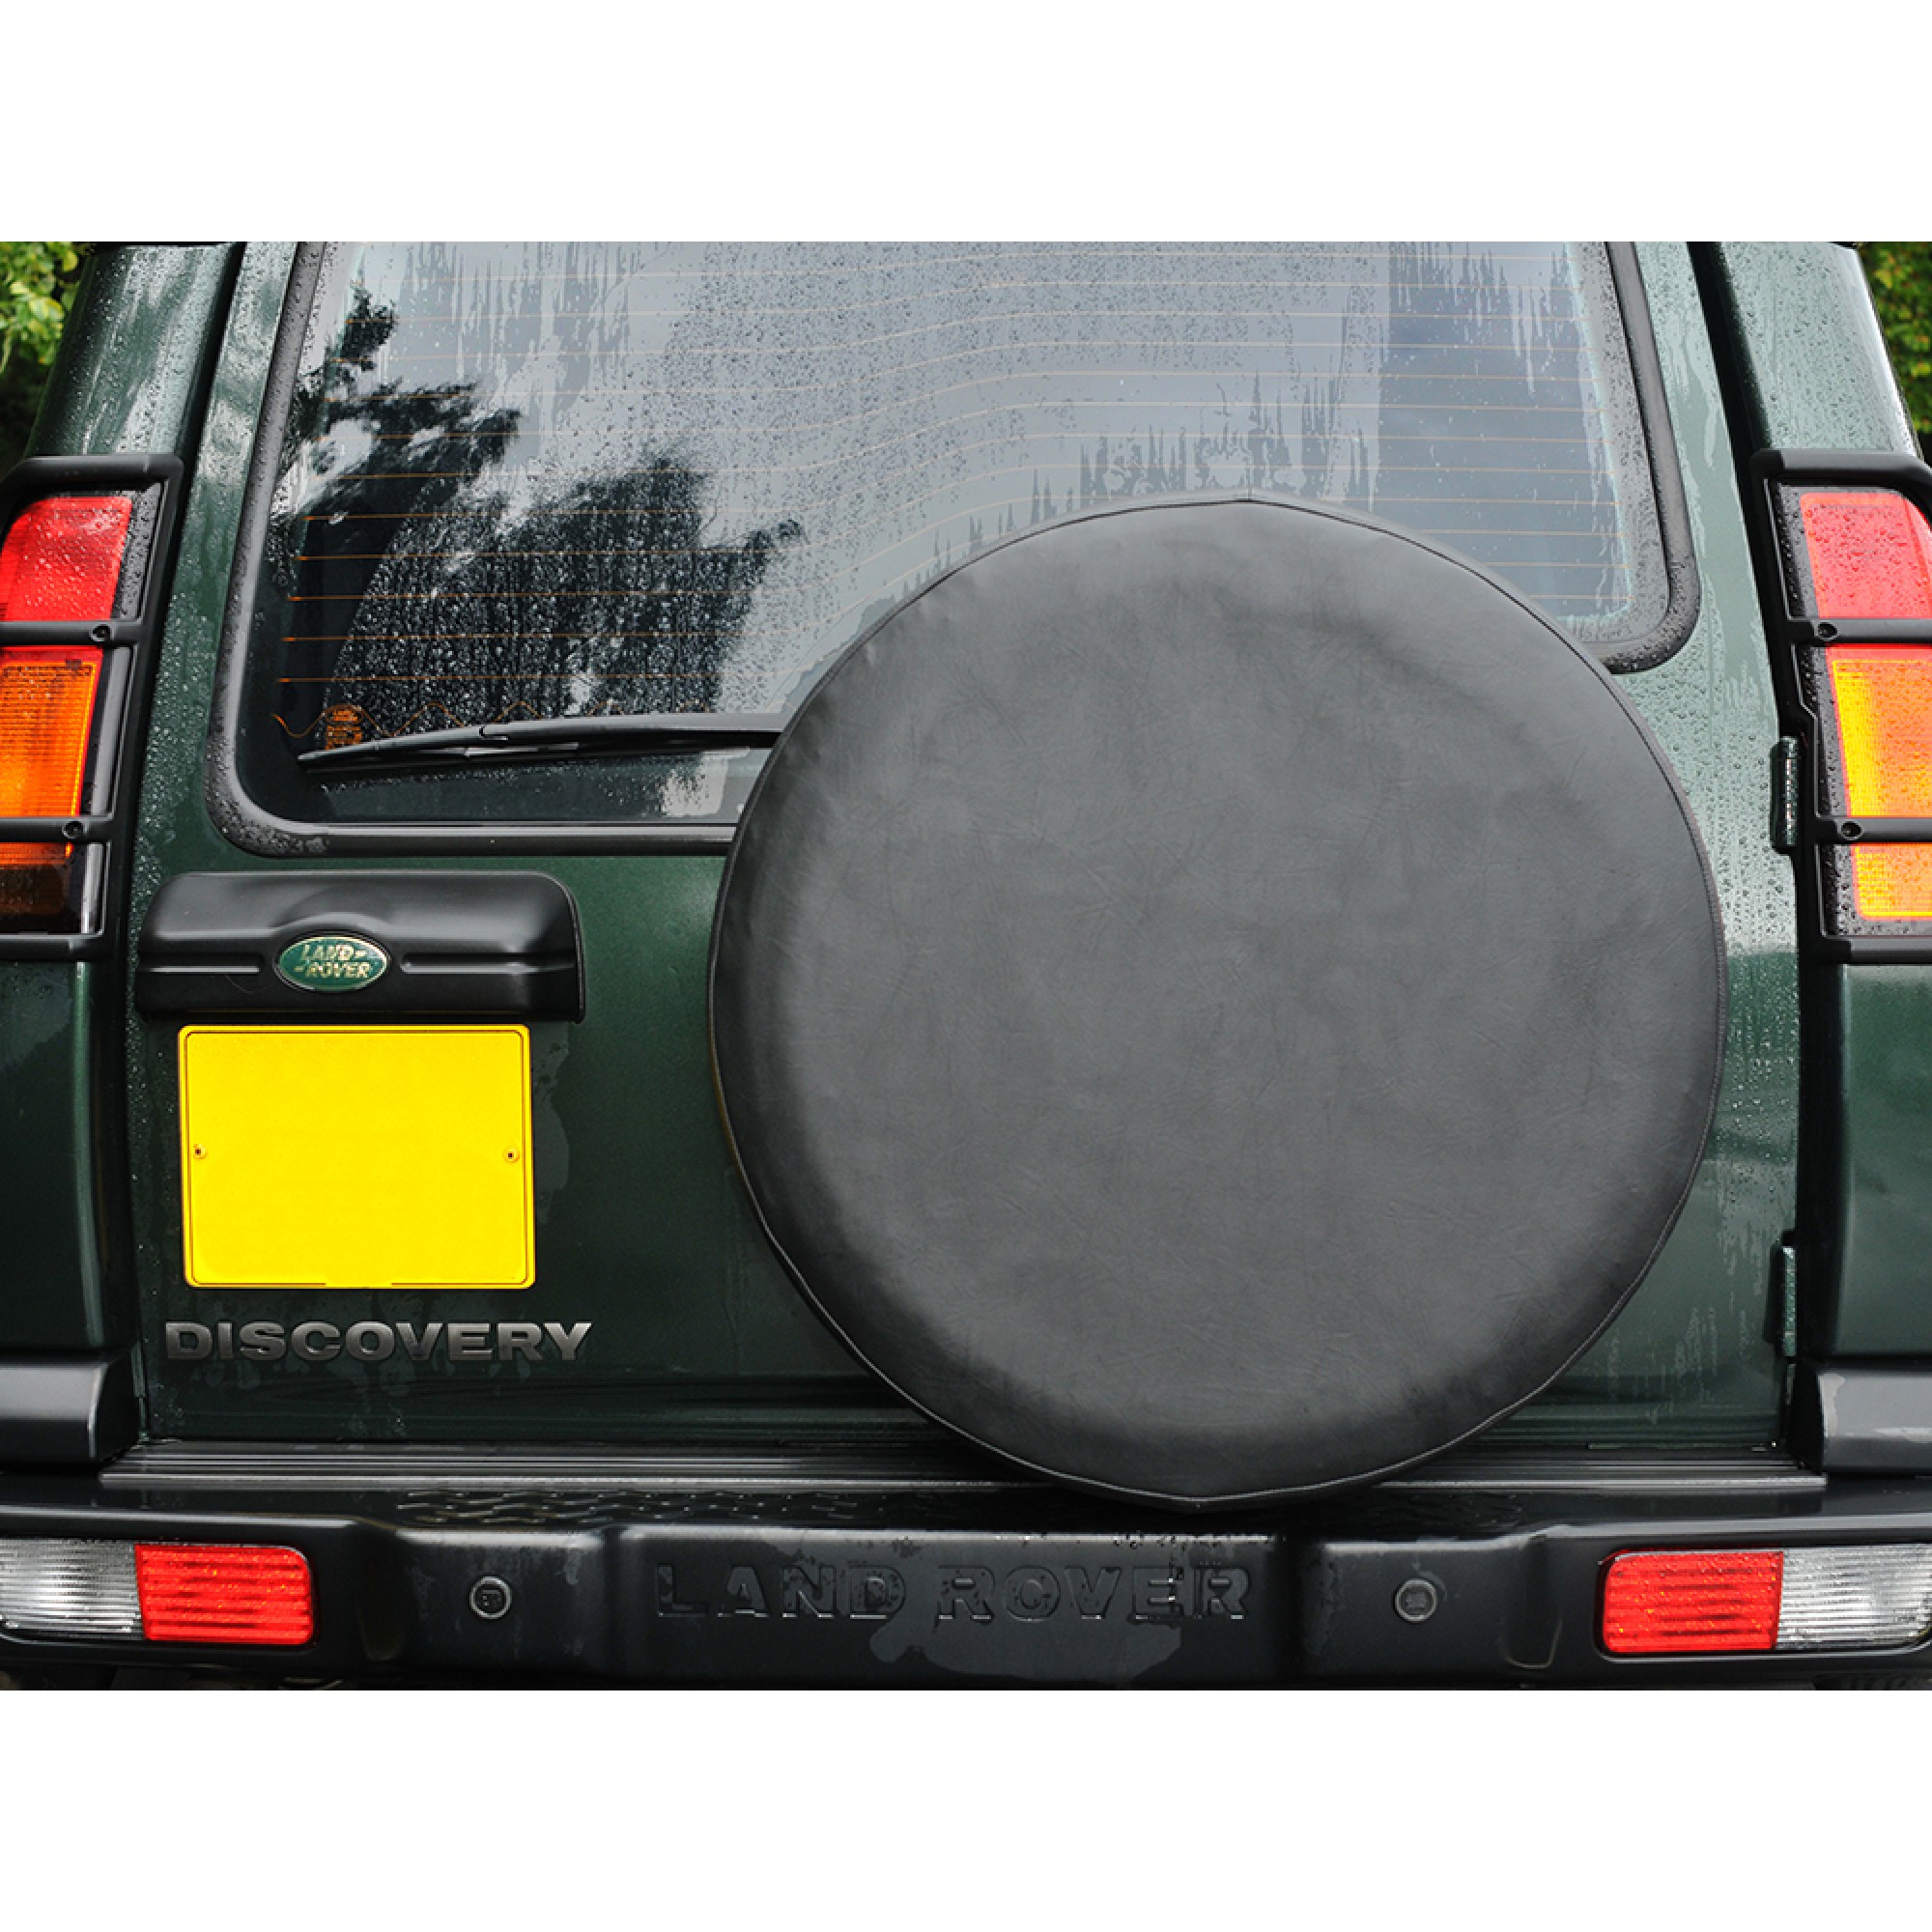 Landrover Discovery Freelander TD Steel & Chrome wheel cover spare tyre wheelcover 